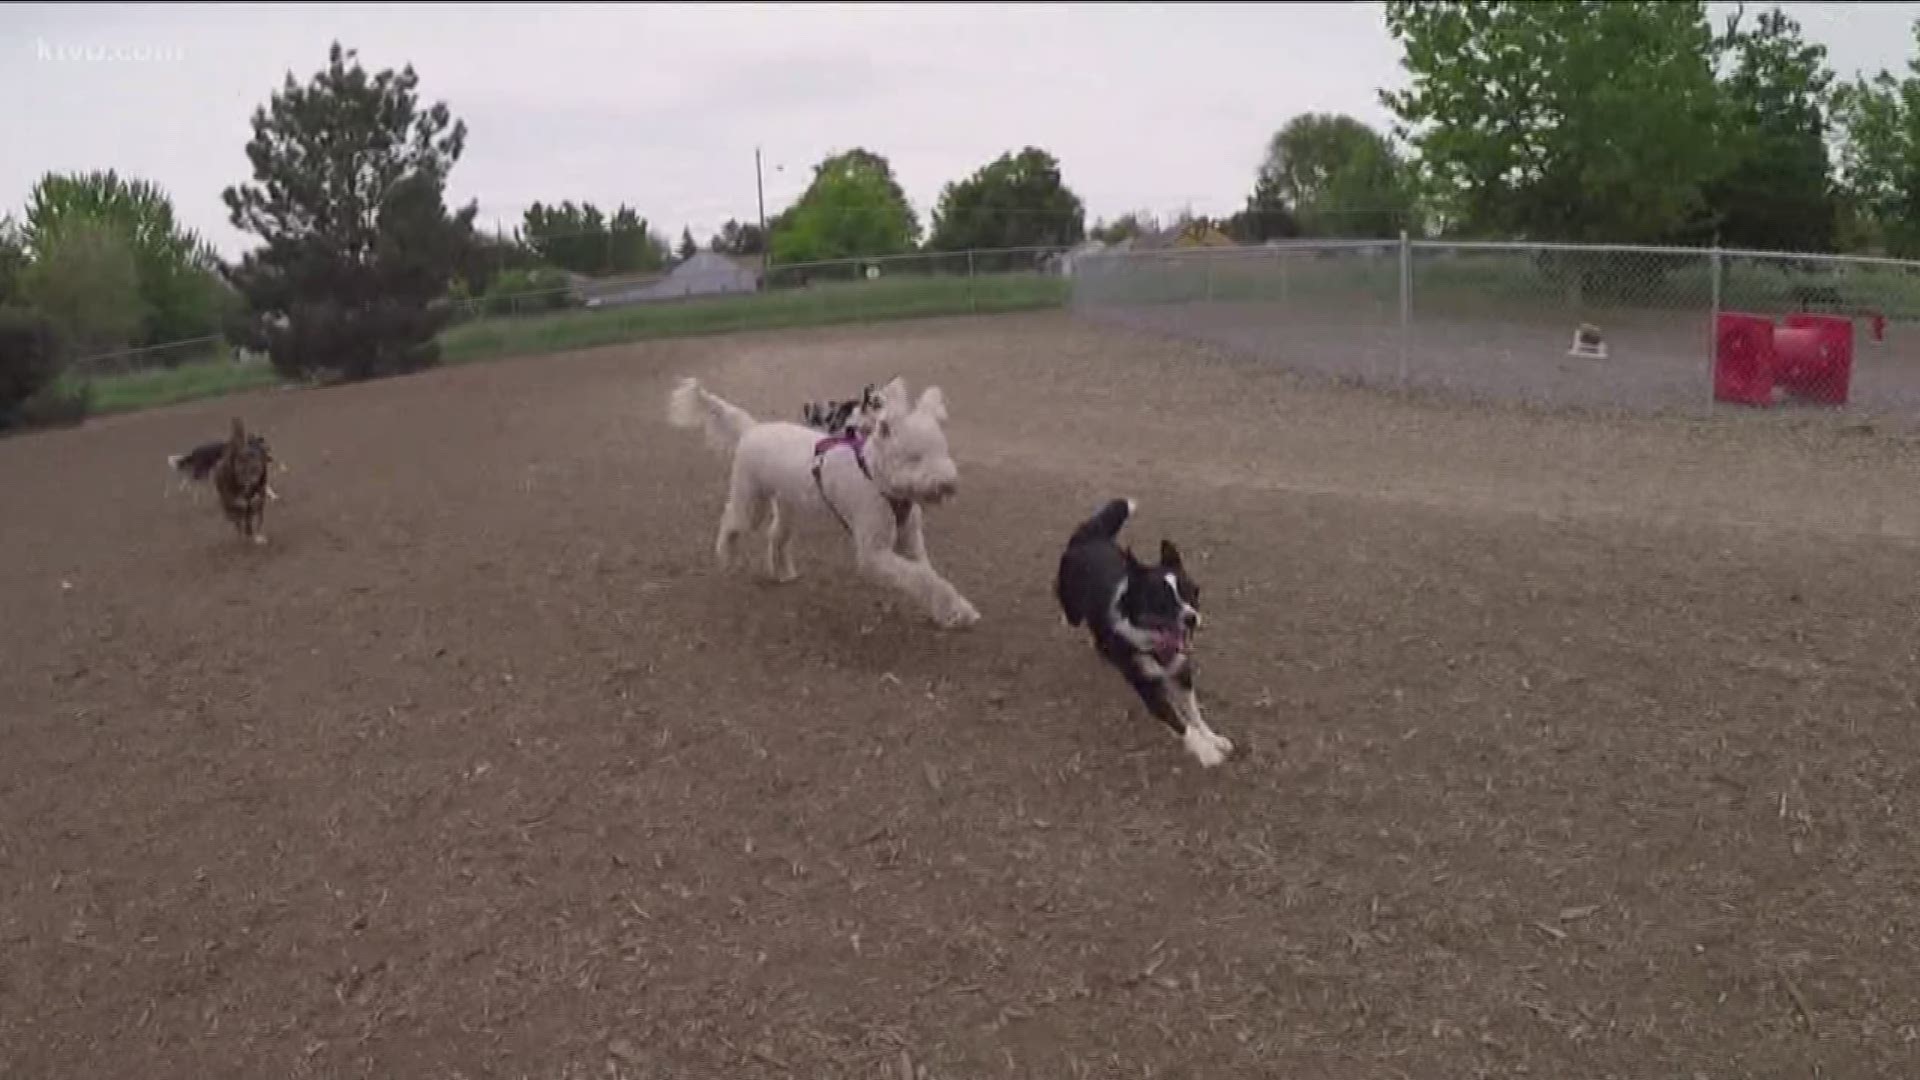 With the weather warming up, more people and their dogs are flocking to off-leash dog parks around Boise. But more dogs could mean more conflict between them and their owners.